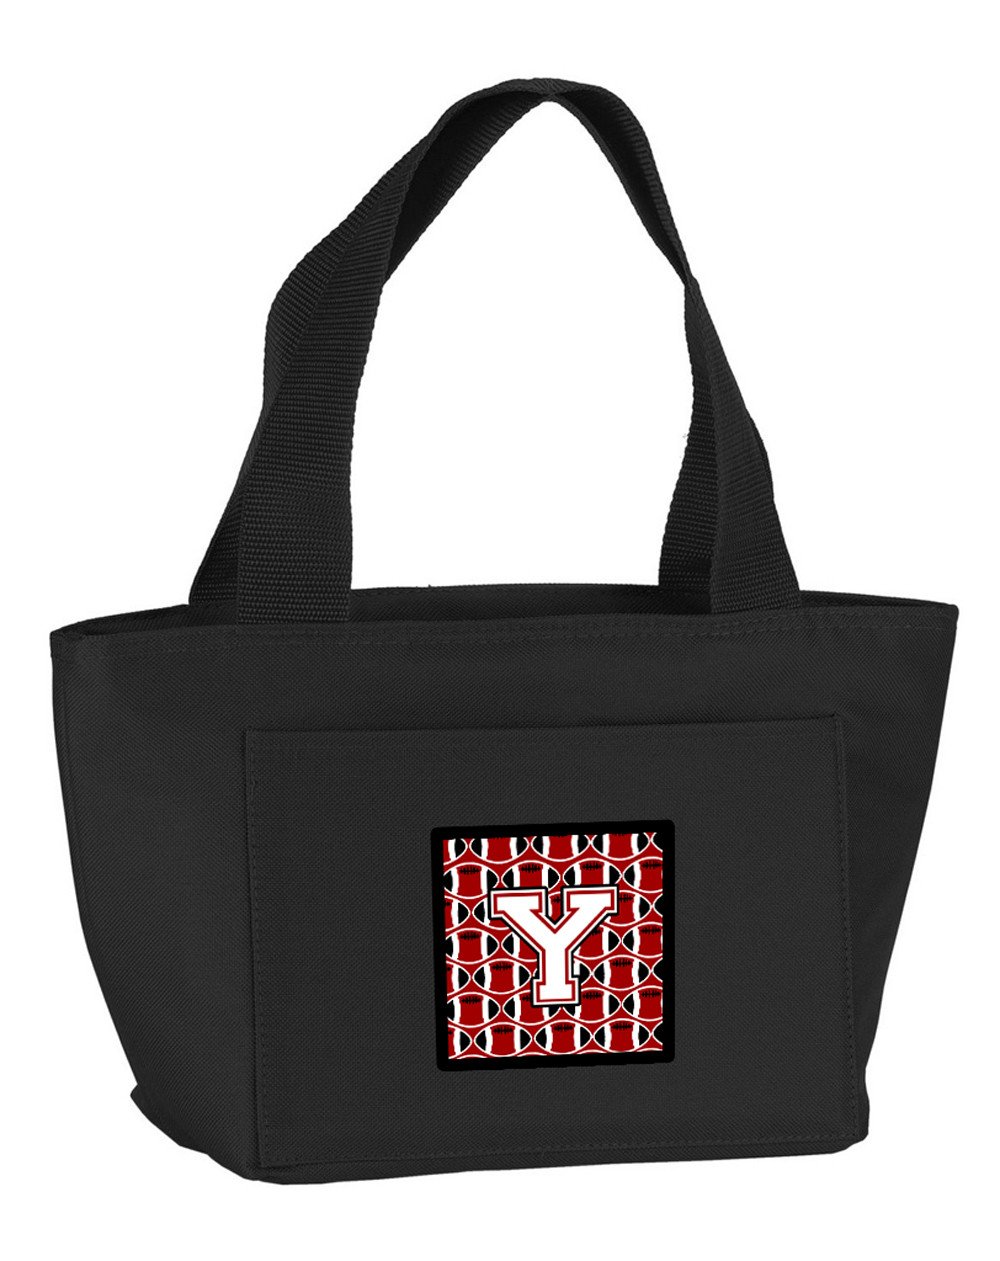 Letter Y Football Cardinal and White Lunch Bag CJ1082-YBK-8808